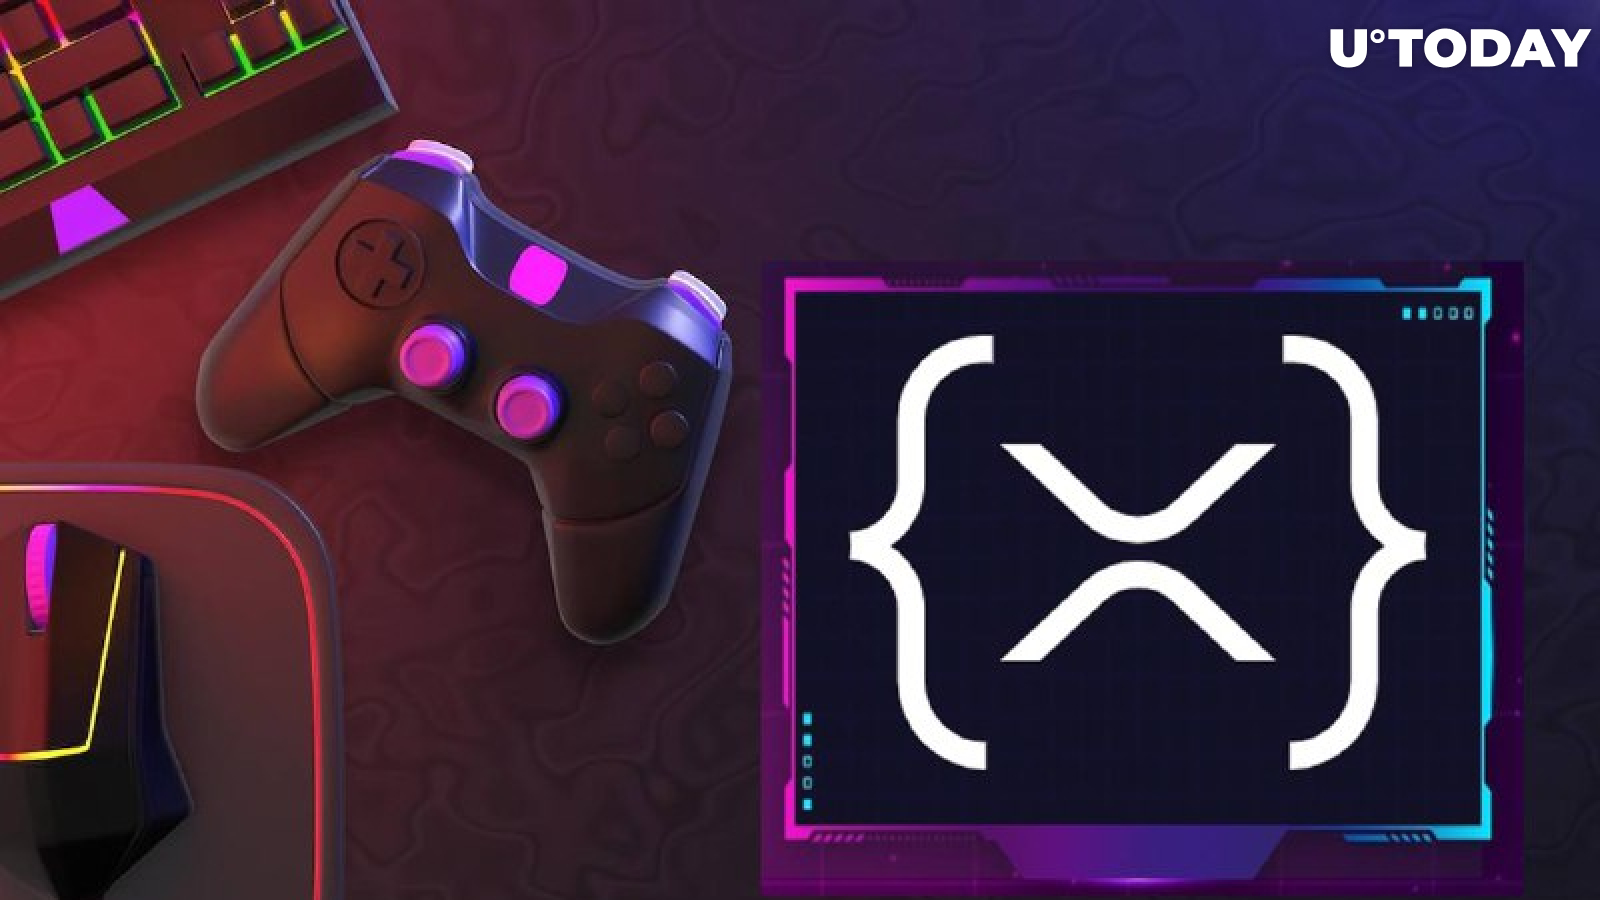 XRPL's Most Active Project Announces Maladroids, Fall Guys-like Game with Rewards in XRP